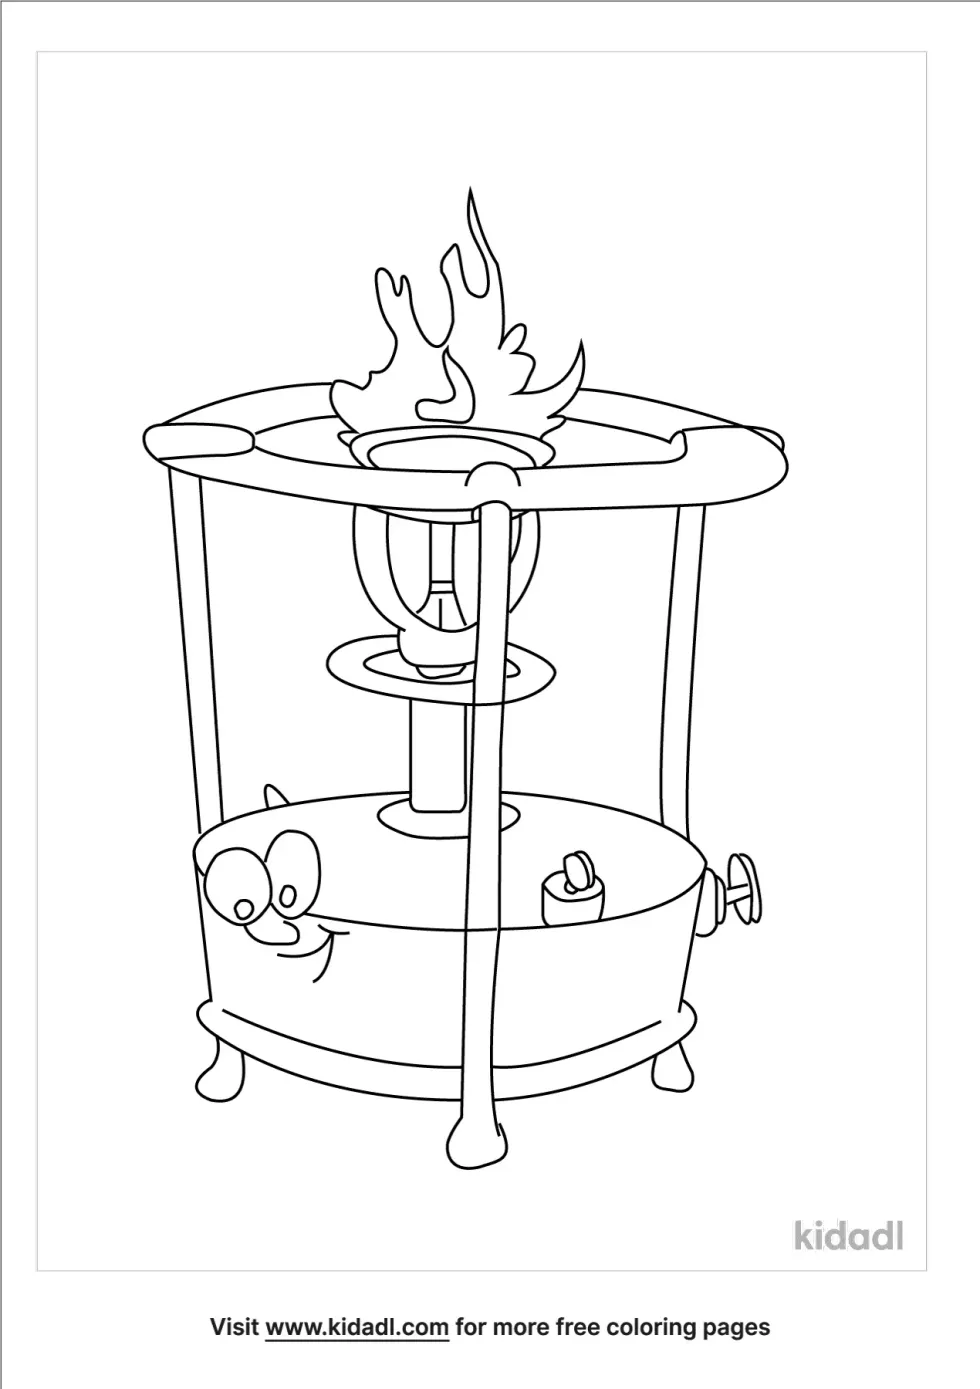 Cute Stove Coloring Page